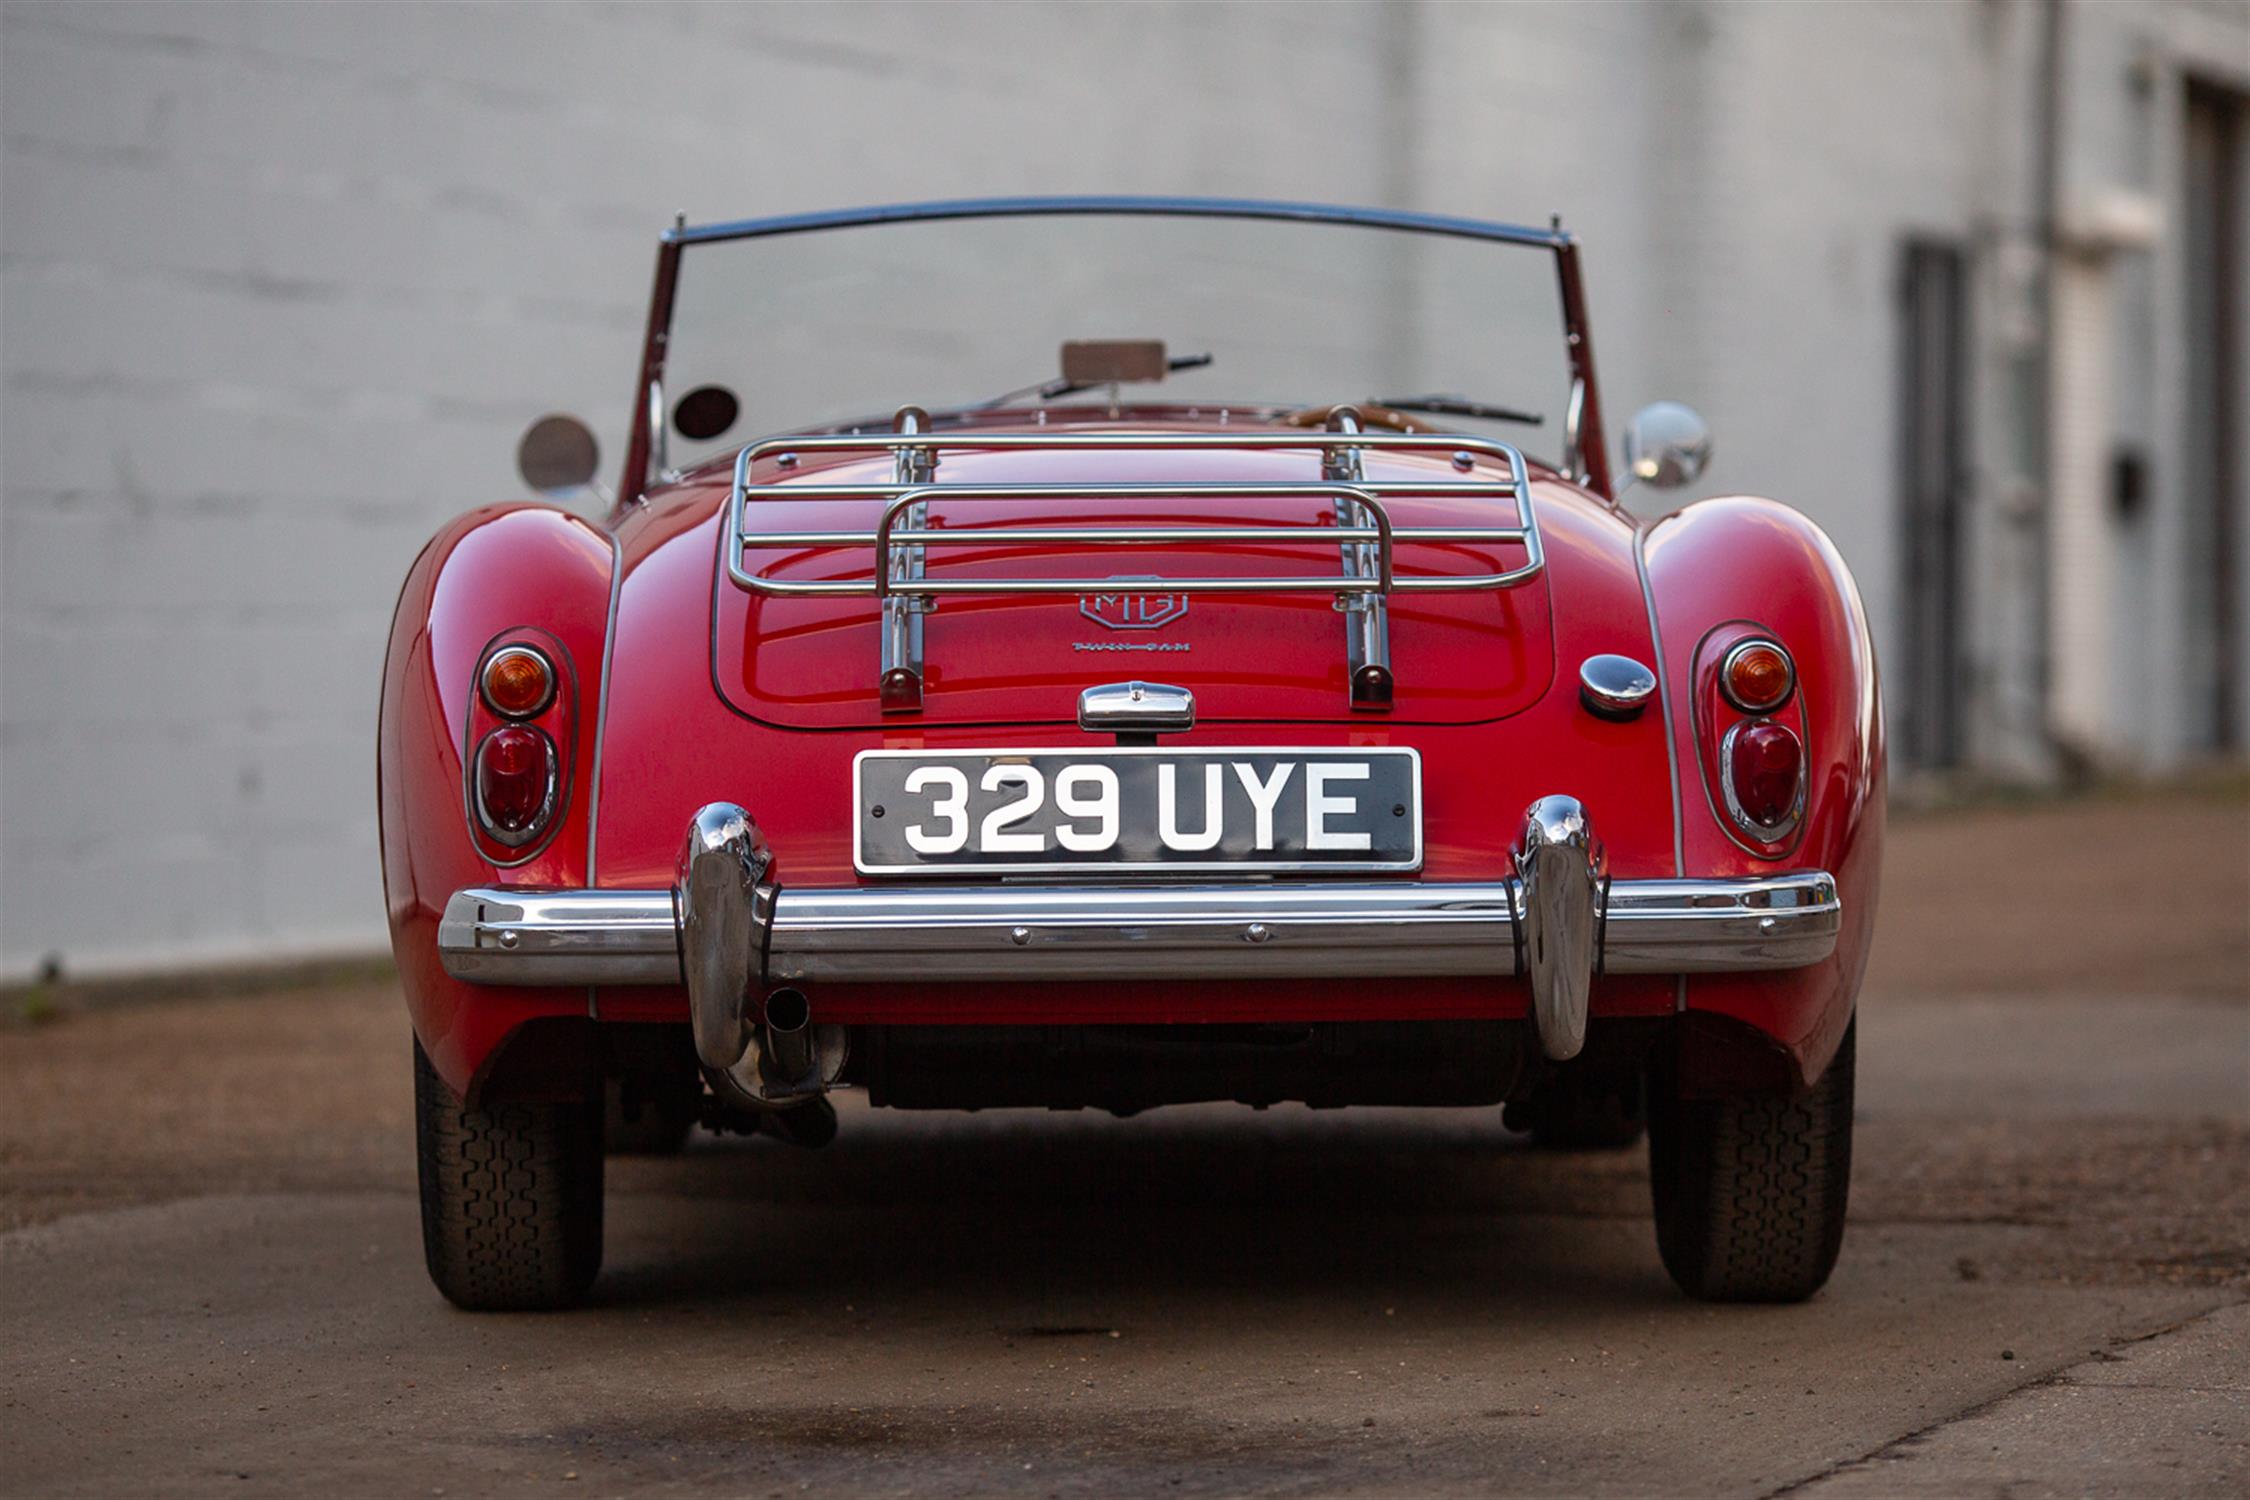 1960 MG A Twin Cam Roadster - Image 7 of 10